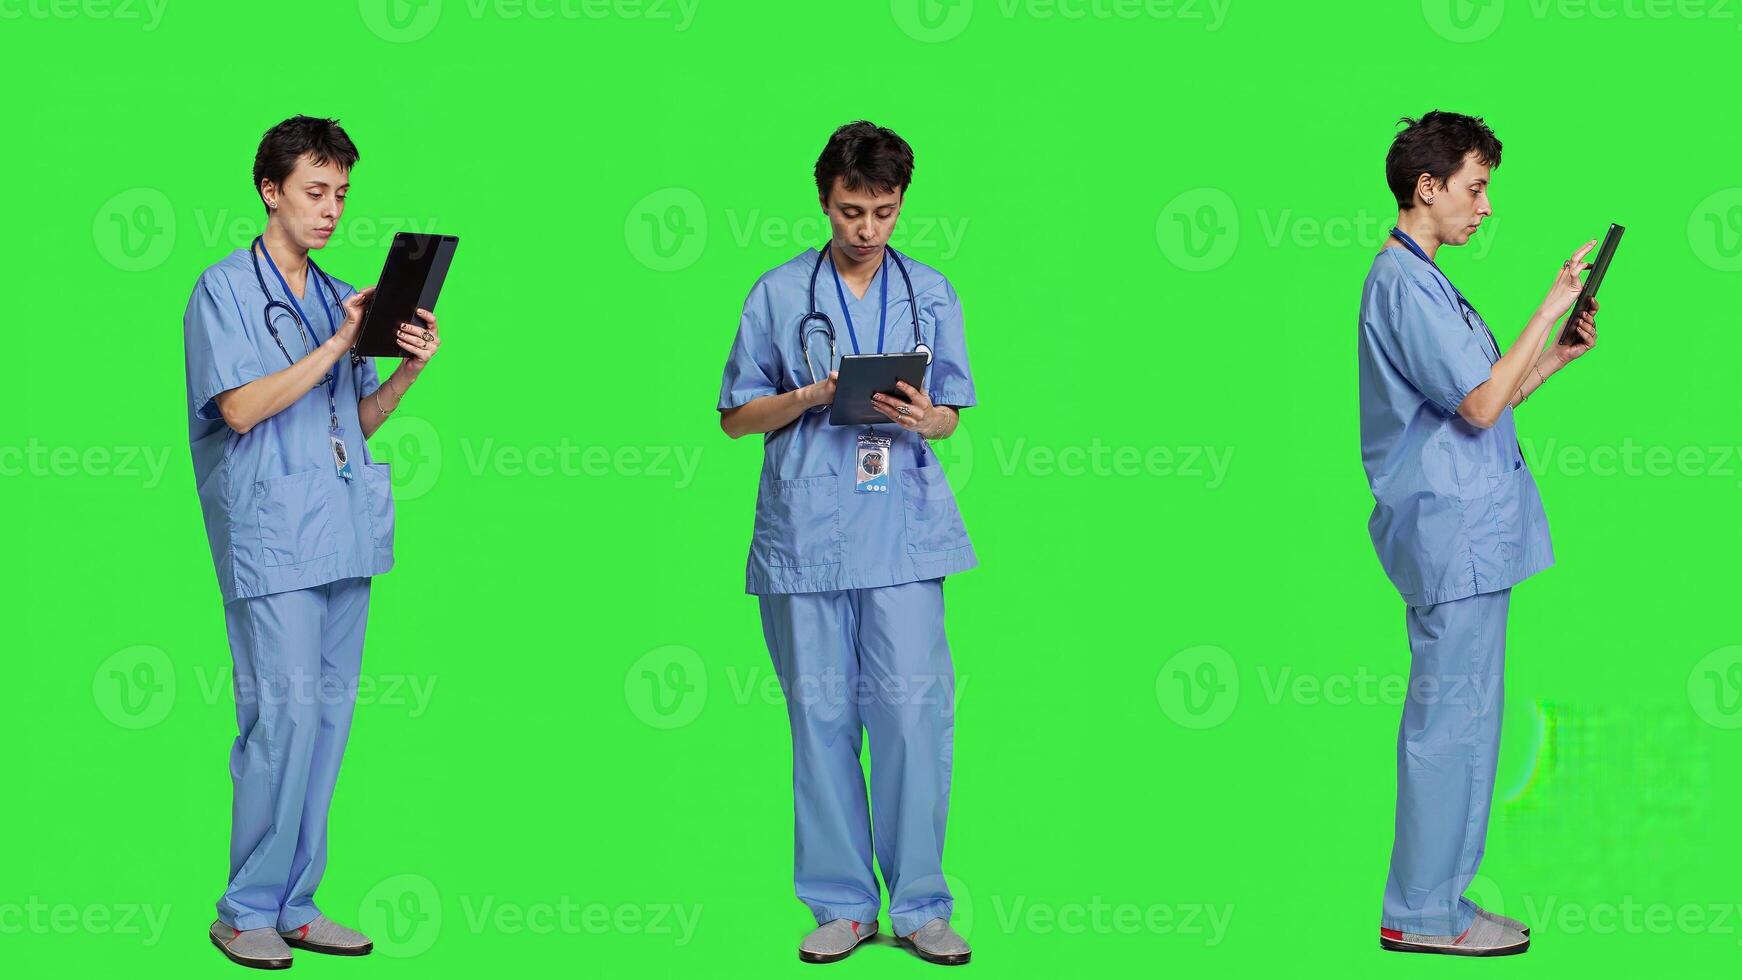 Medical assistant browsing online webpages on tablet and texting, using social media apps to chat with people. Nurse navigates internet on gadget, standing against greenscreen backdrop. Camera A. photo